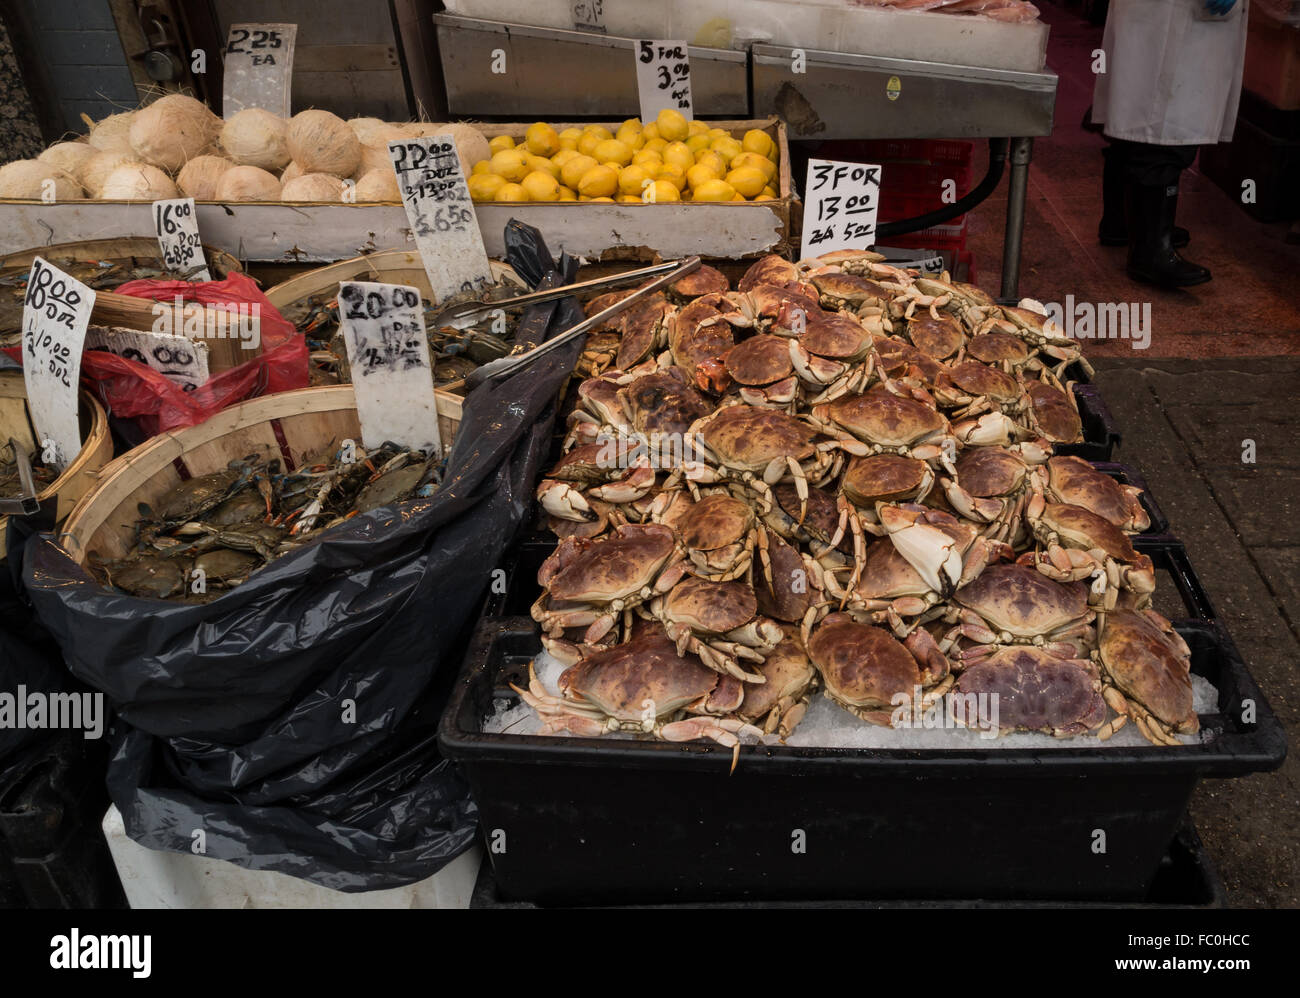 Piles of crabs and lemons for sale in a seafood and fish market shop in Chinatown, New York City. Stock Photo